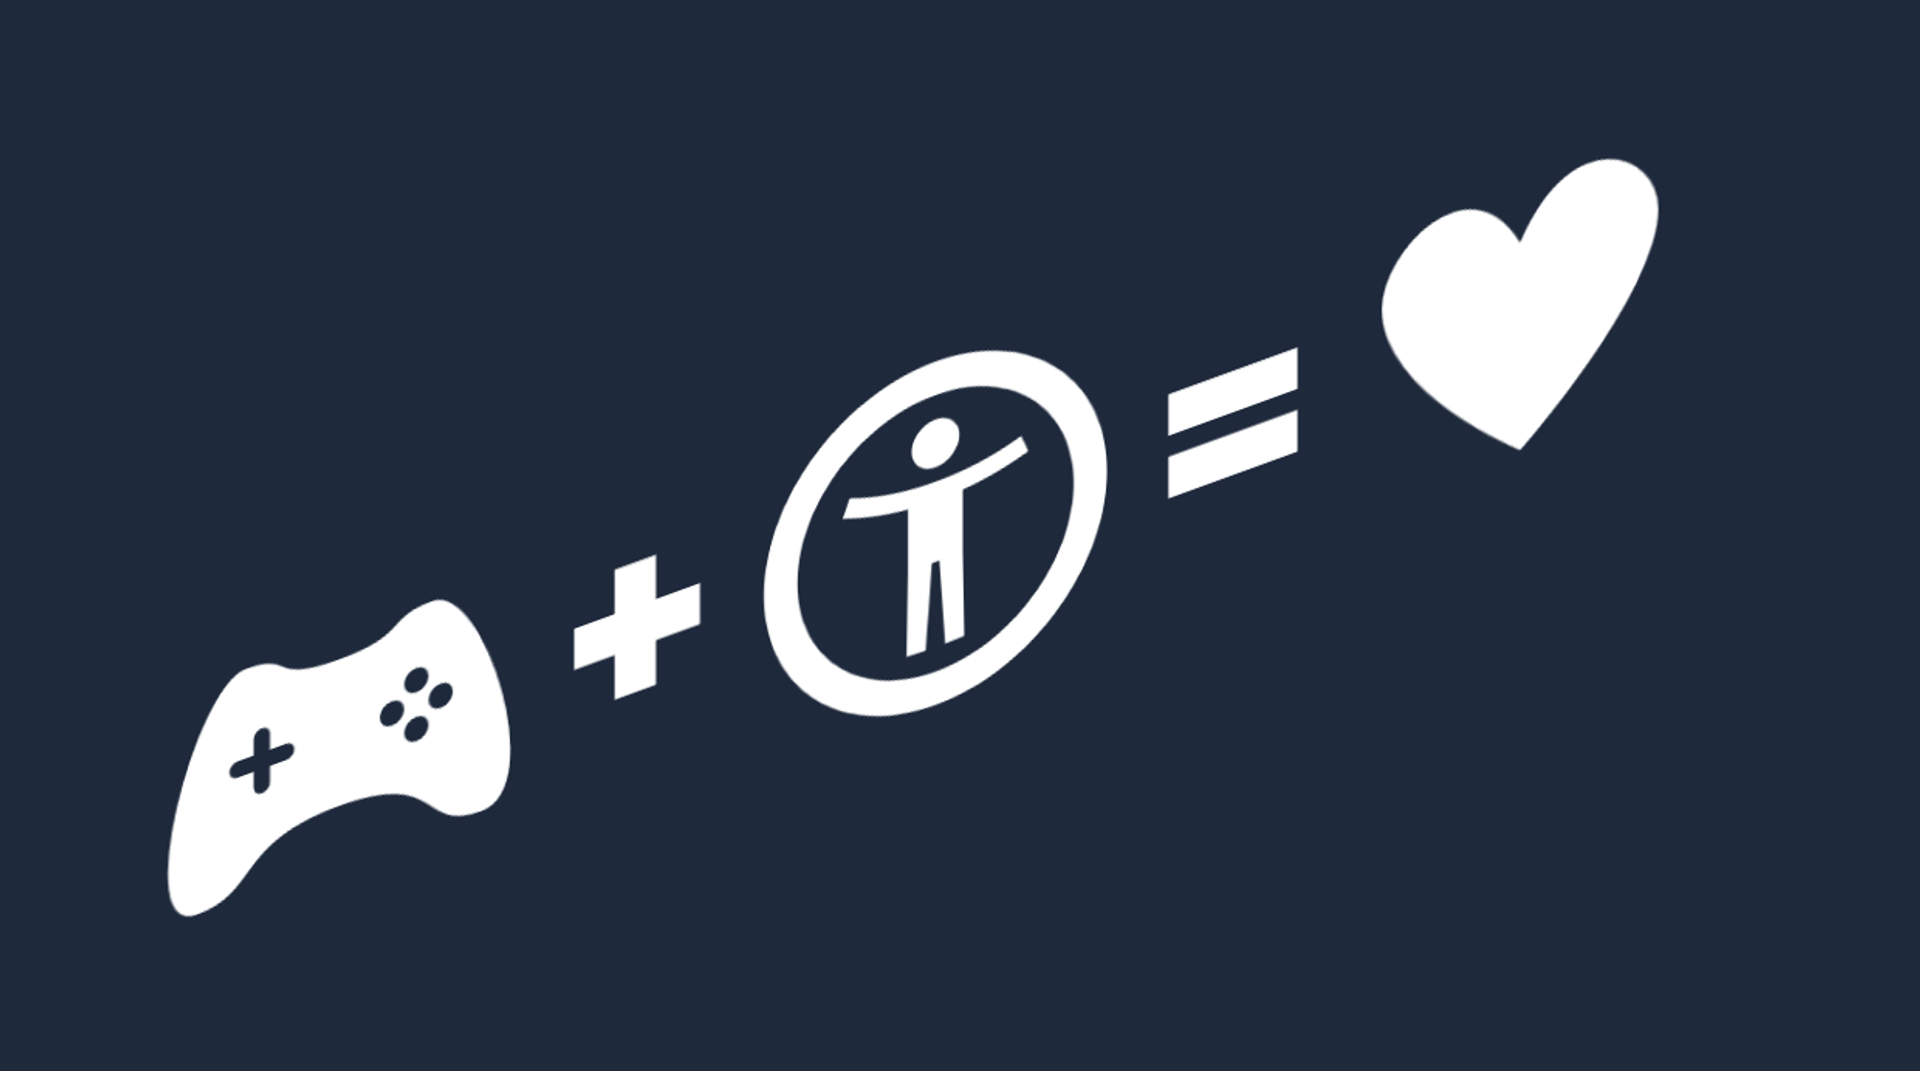 Controller plus accessibility equals love. Icons.